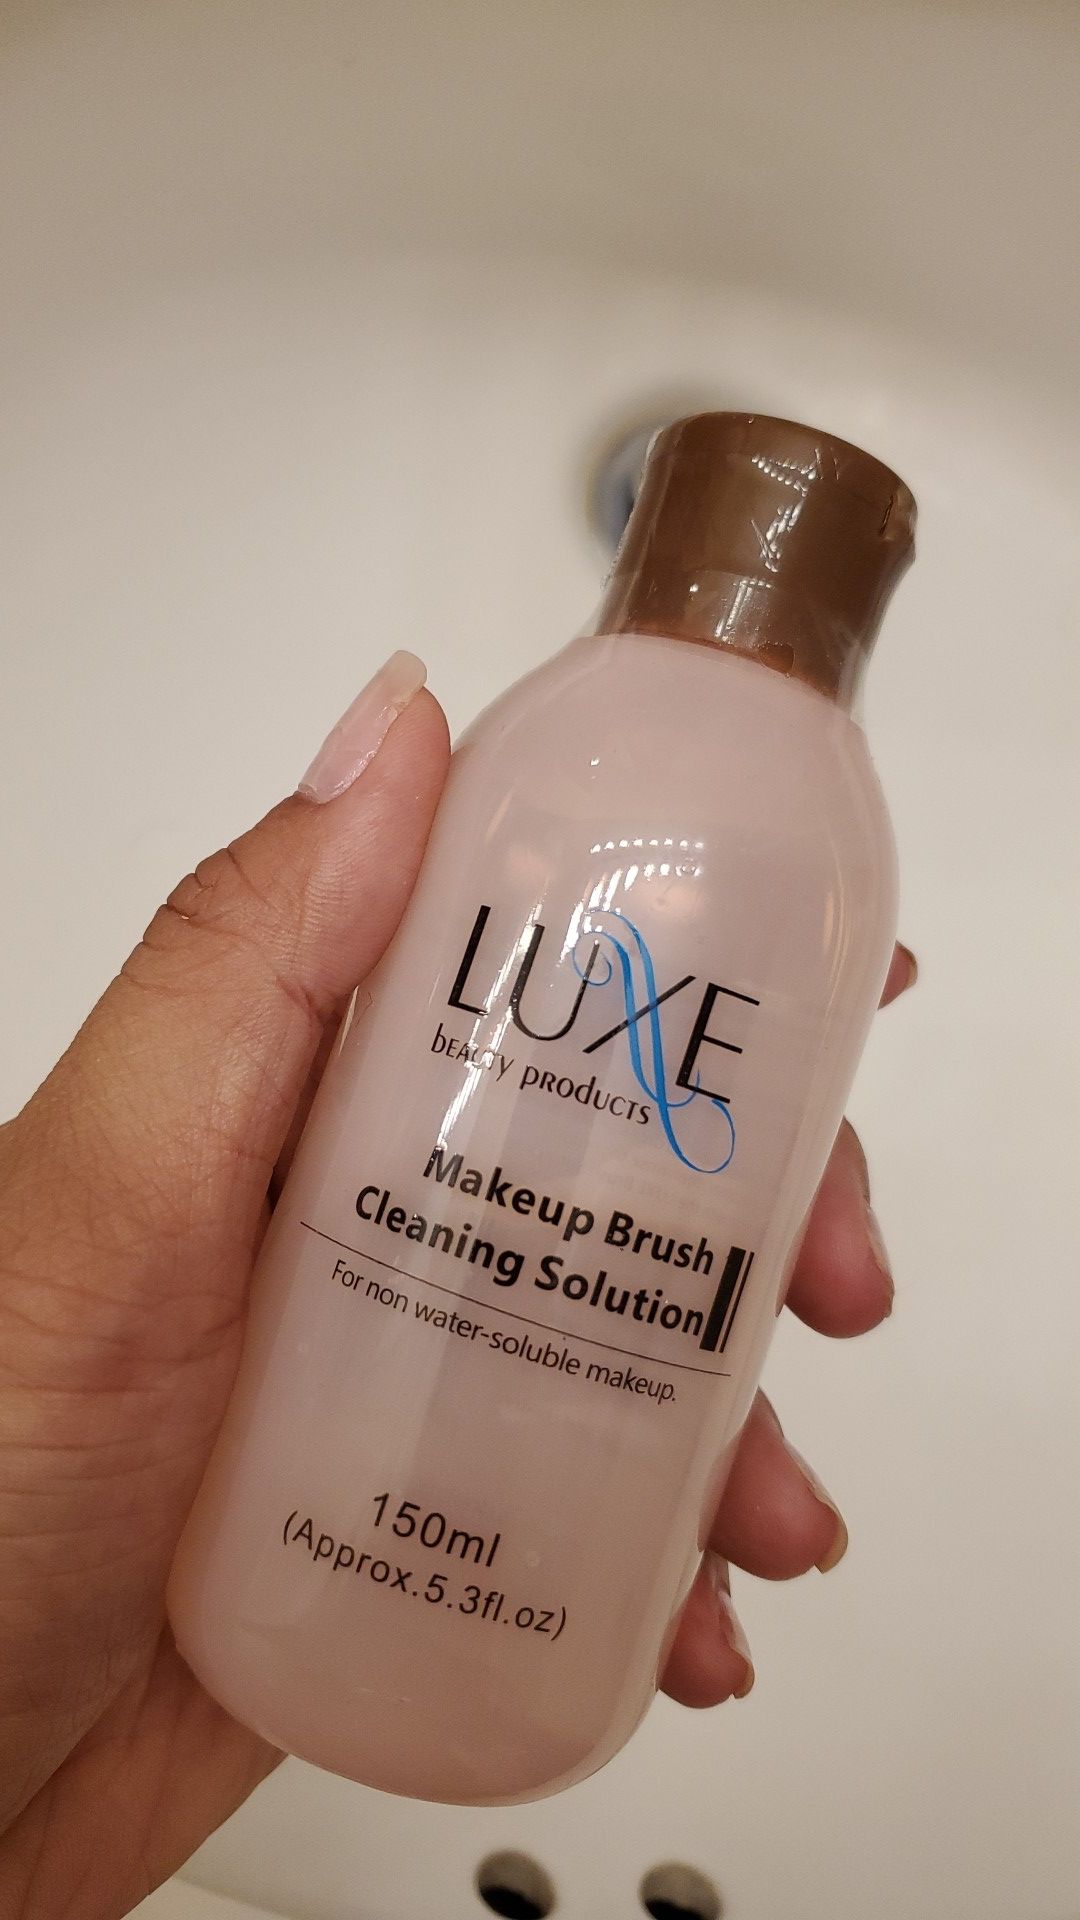 Luxe makeup brush cleanser